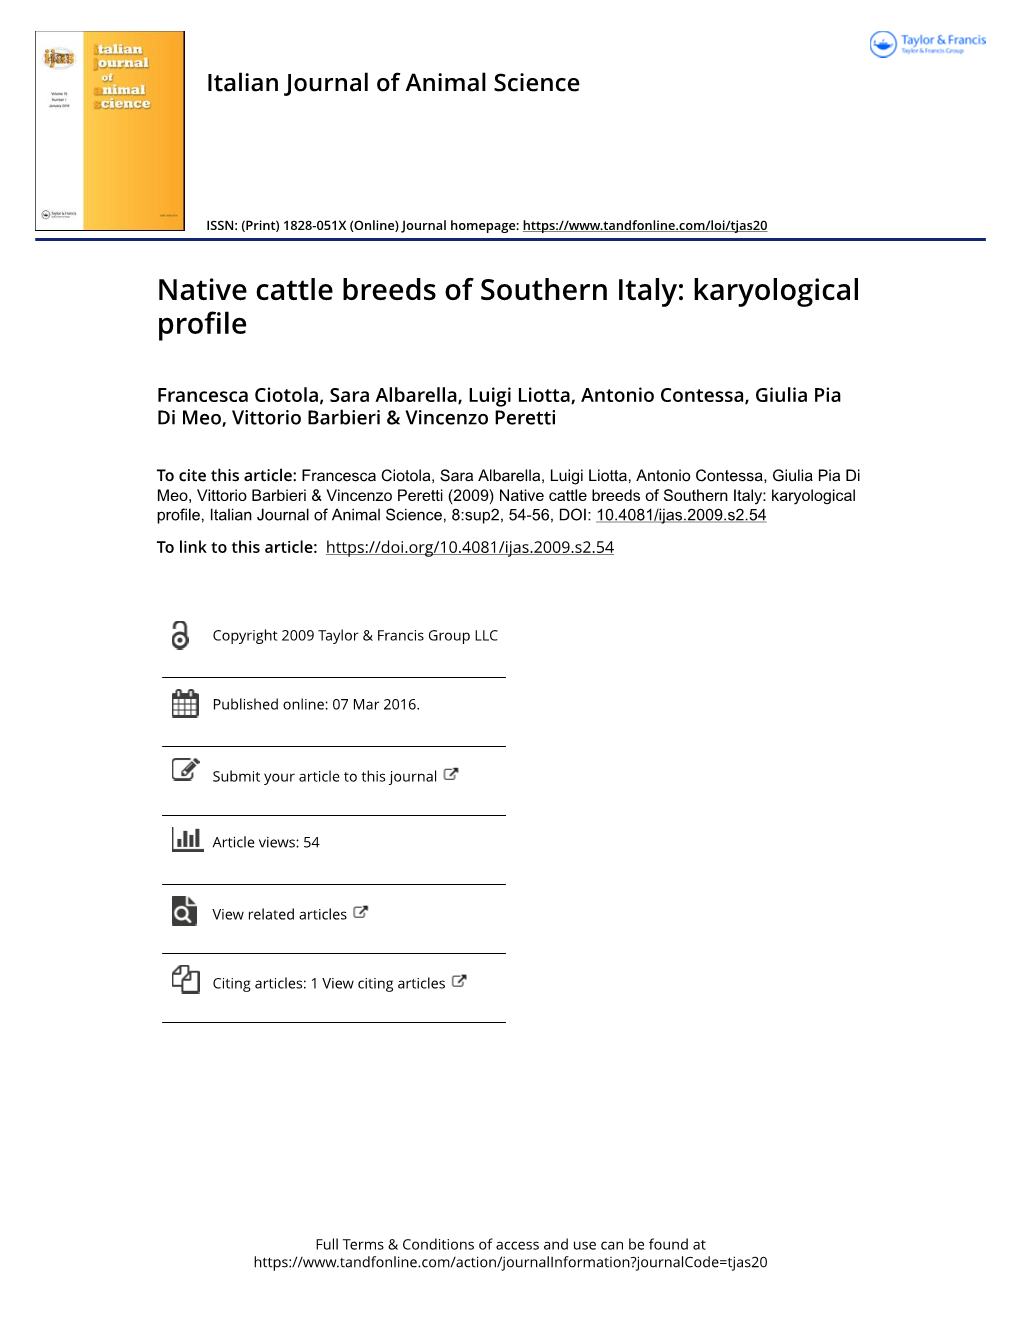 Native Cattle Breeds of Southern Italy: Karyological Profile